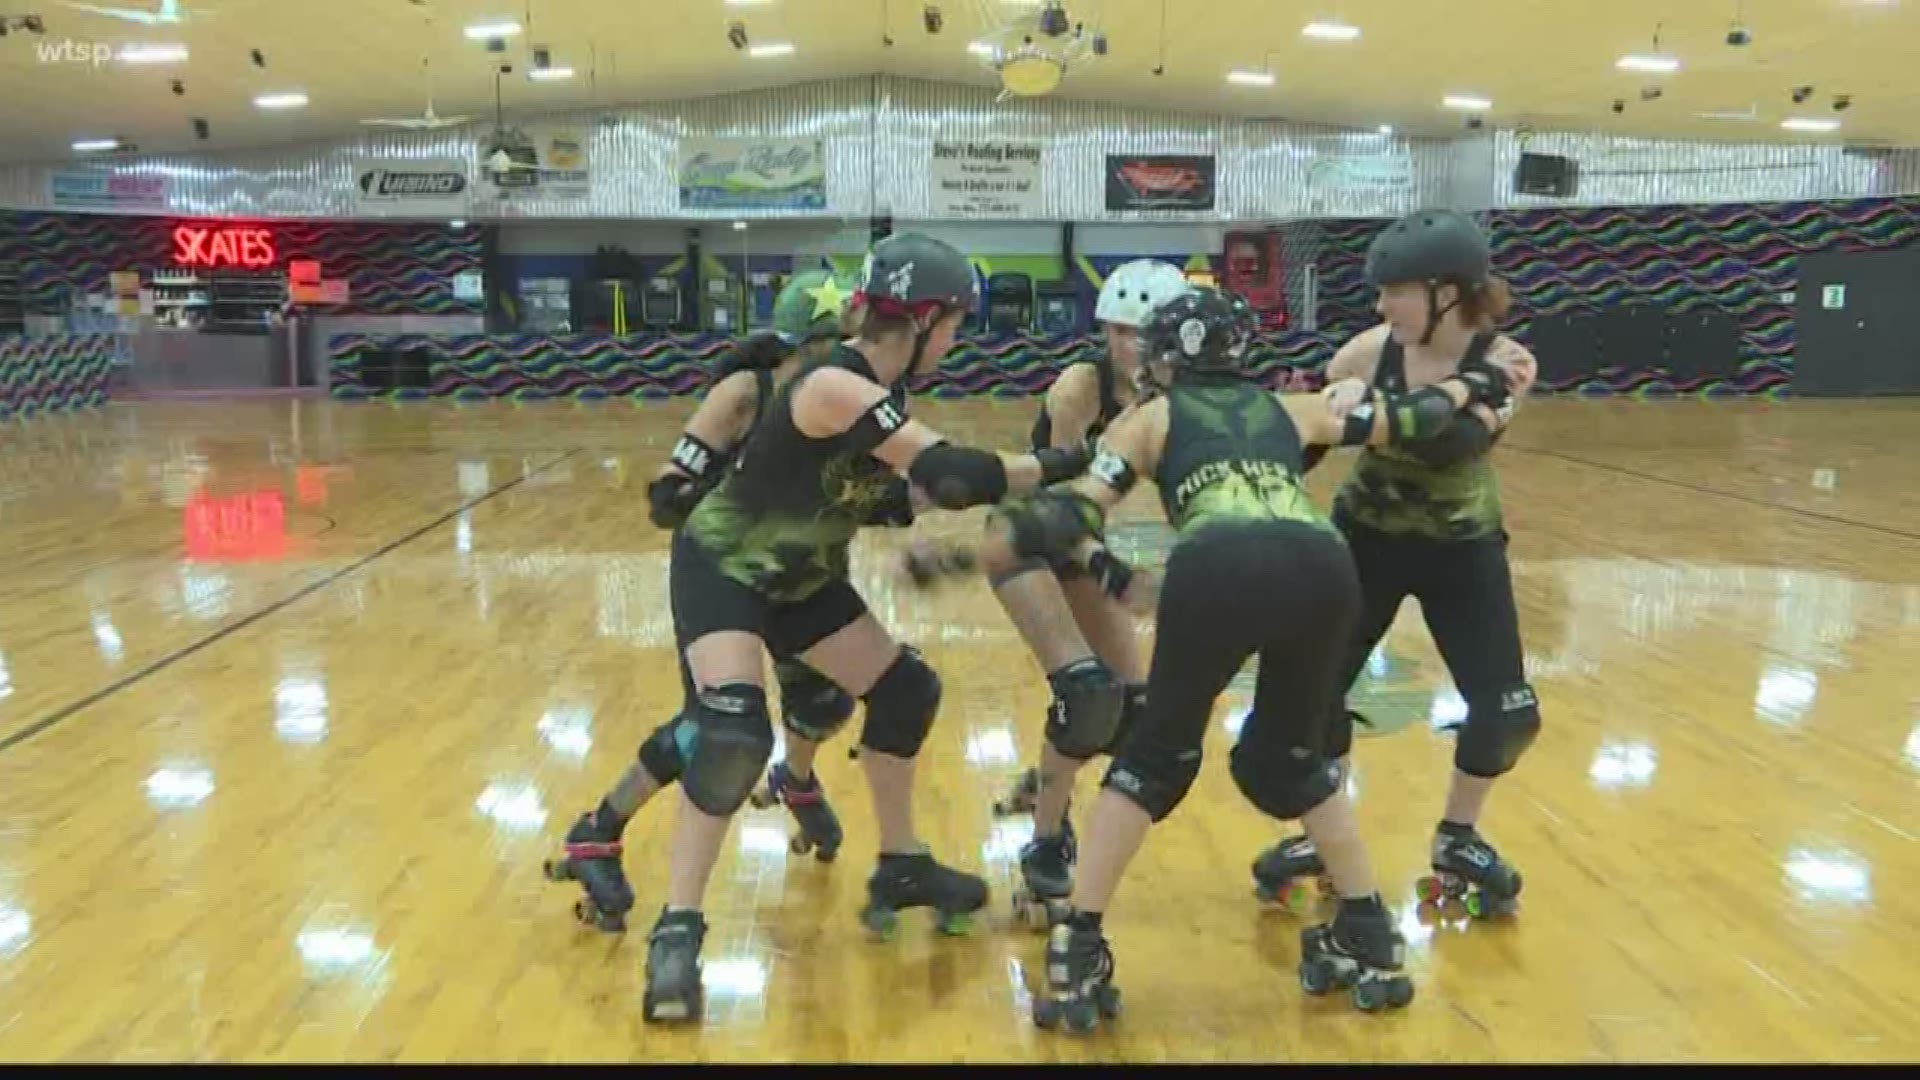 A local roller derby team is looking to take home a win tonight and raise money for a good cause in the process. The Valkyries are facing off against Fort Myers for a derby match to remember, with a portion of the match's proceeds going to the Pasco Sheriff’s K-9 Association. The group raises funds and awareness for both active and retired K-9s. For this local team, that charity was an easy choice. https://on.wtsp.com/2mjH4Bn